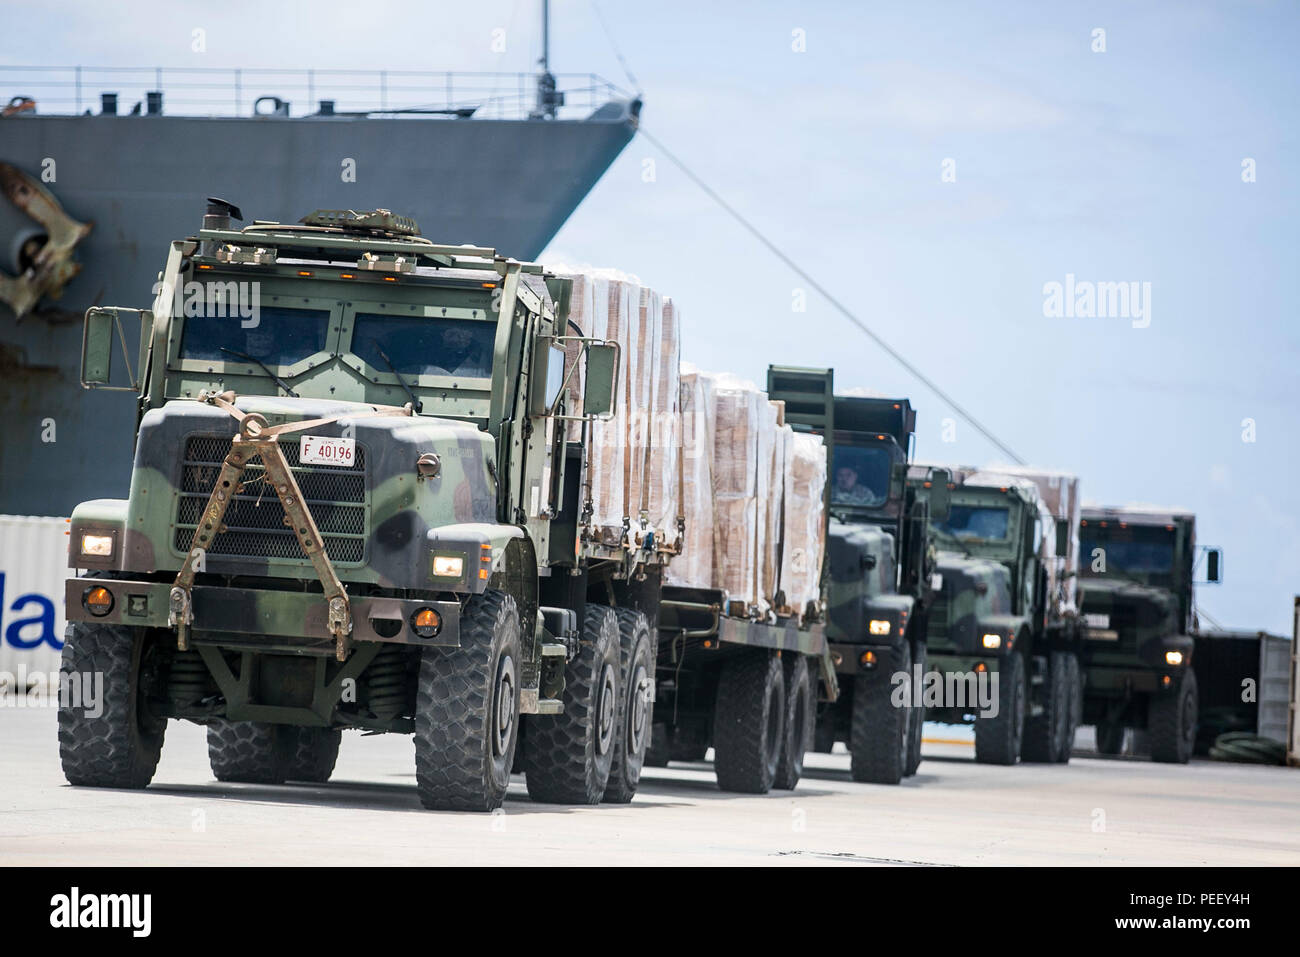 U.S. Marine 7-ton trucks with Combat Logistics Battalion 31, 31st Marine Expeditionary Unit, prepare to distribute water and supplies from the USS Ashland (LSD 48) to local civilians as part of typhoon relief efforts in Saipan, Aug. 11, 2015. The 31st MEU and the ships of the Bonhomme Richard Amphibious Ready Group are assisting the Federal Emergency Management Agency with distributing emergency relief supplies to Saipan after the island was struck by Typhoon Soudelor Aug. 2-3. (U.S. Marine Corps photo by Lance Cpl. Brian Bekkala/Released) Stock Photo